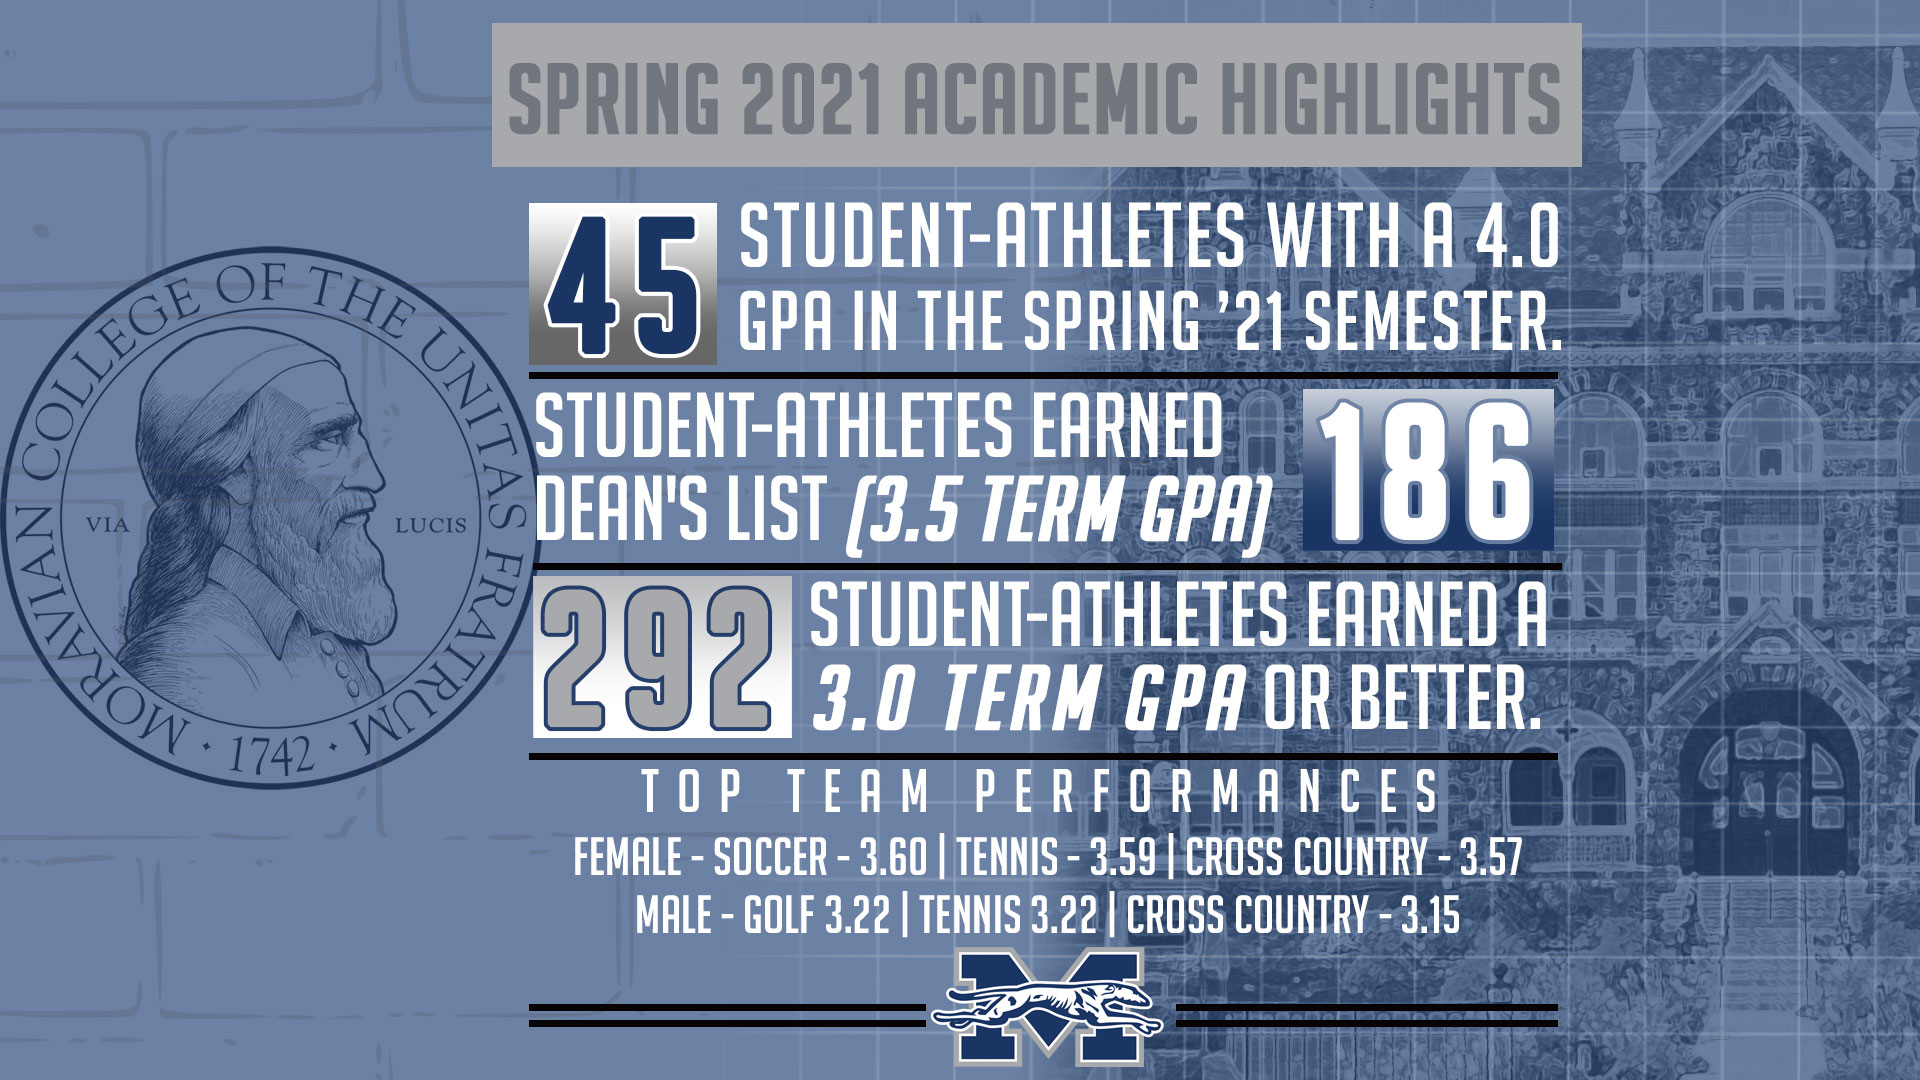 2021 Spring semester academic highlights - 45 students with 4.0 GPA, 186 named to Dean's List and 292 with 3.0 GPA or higher